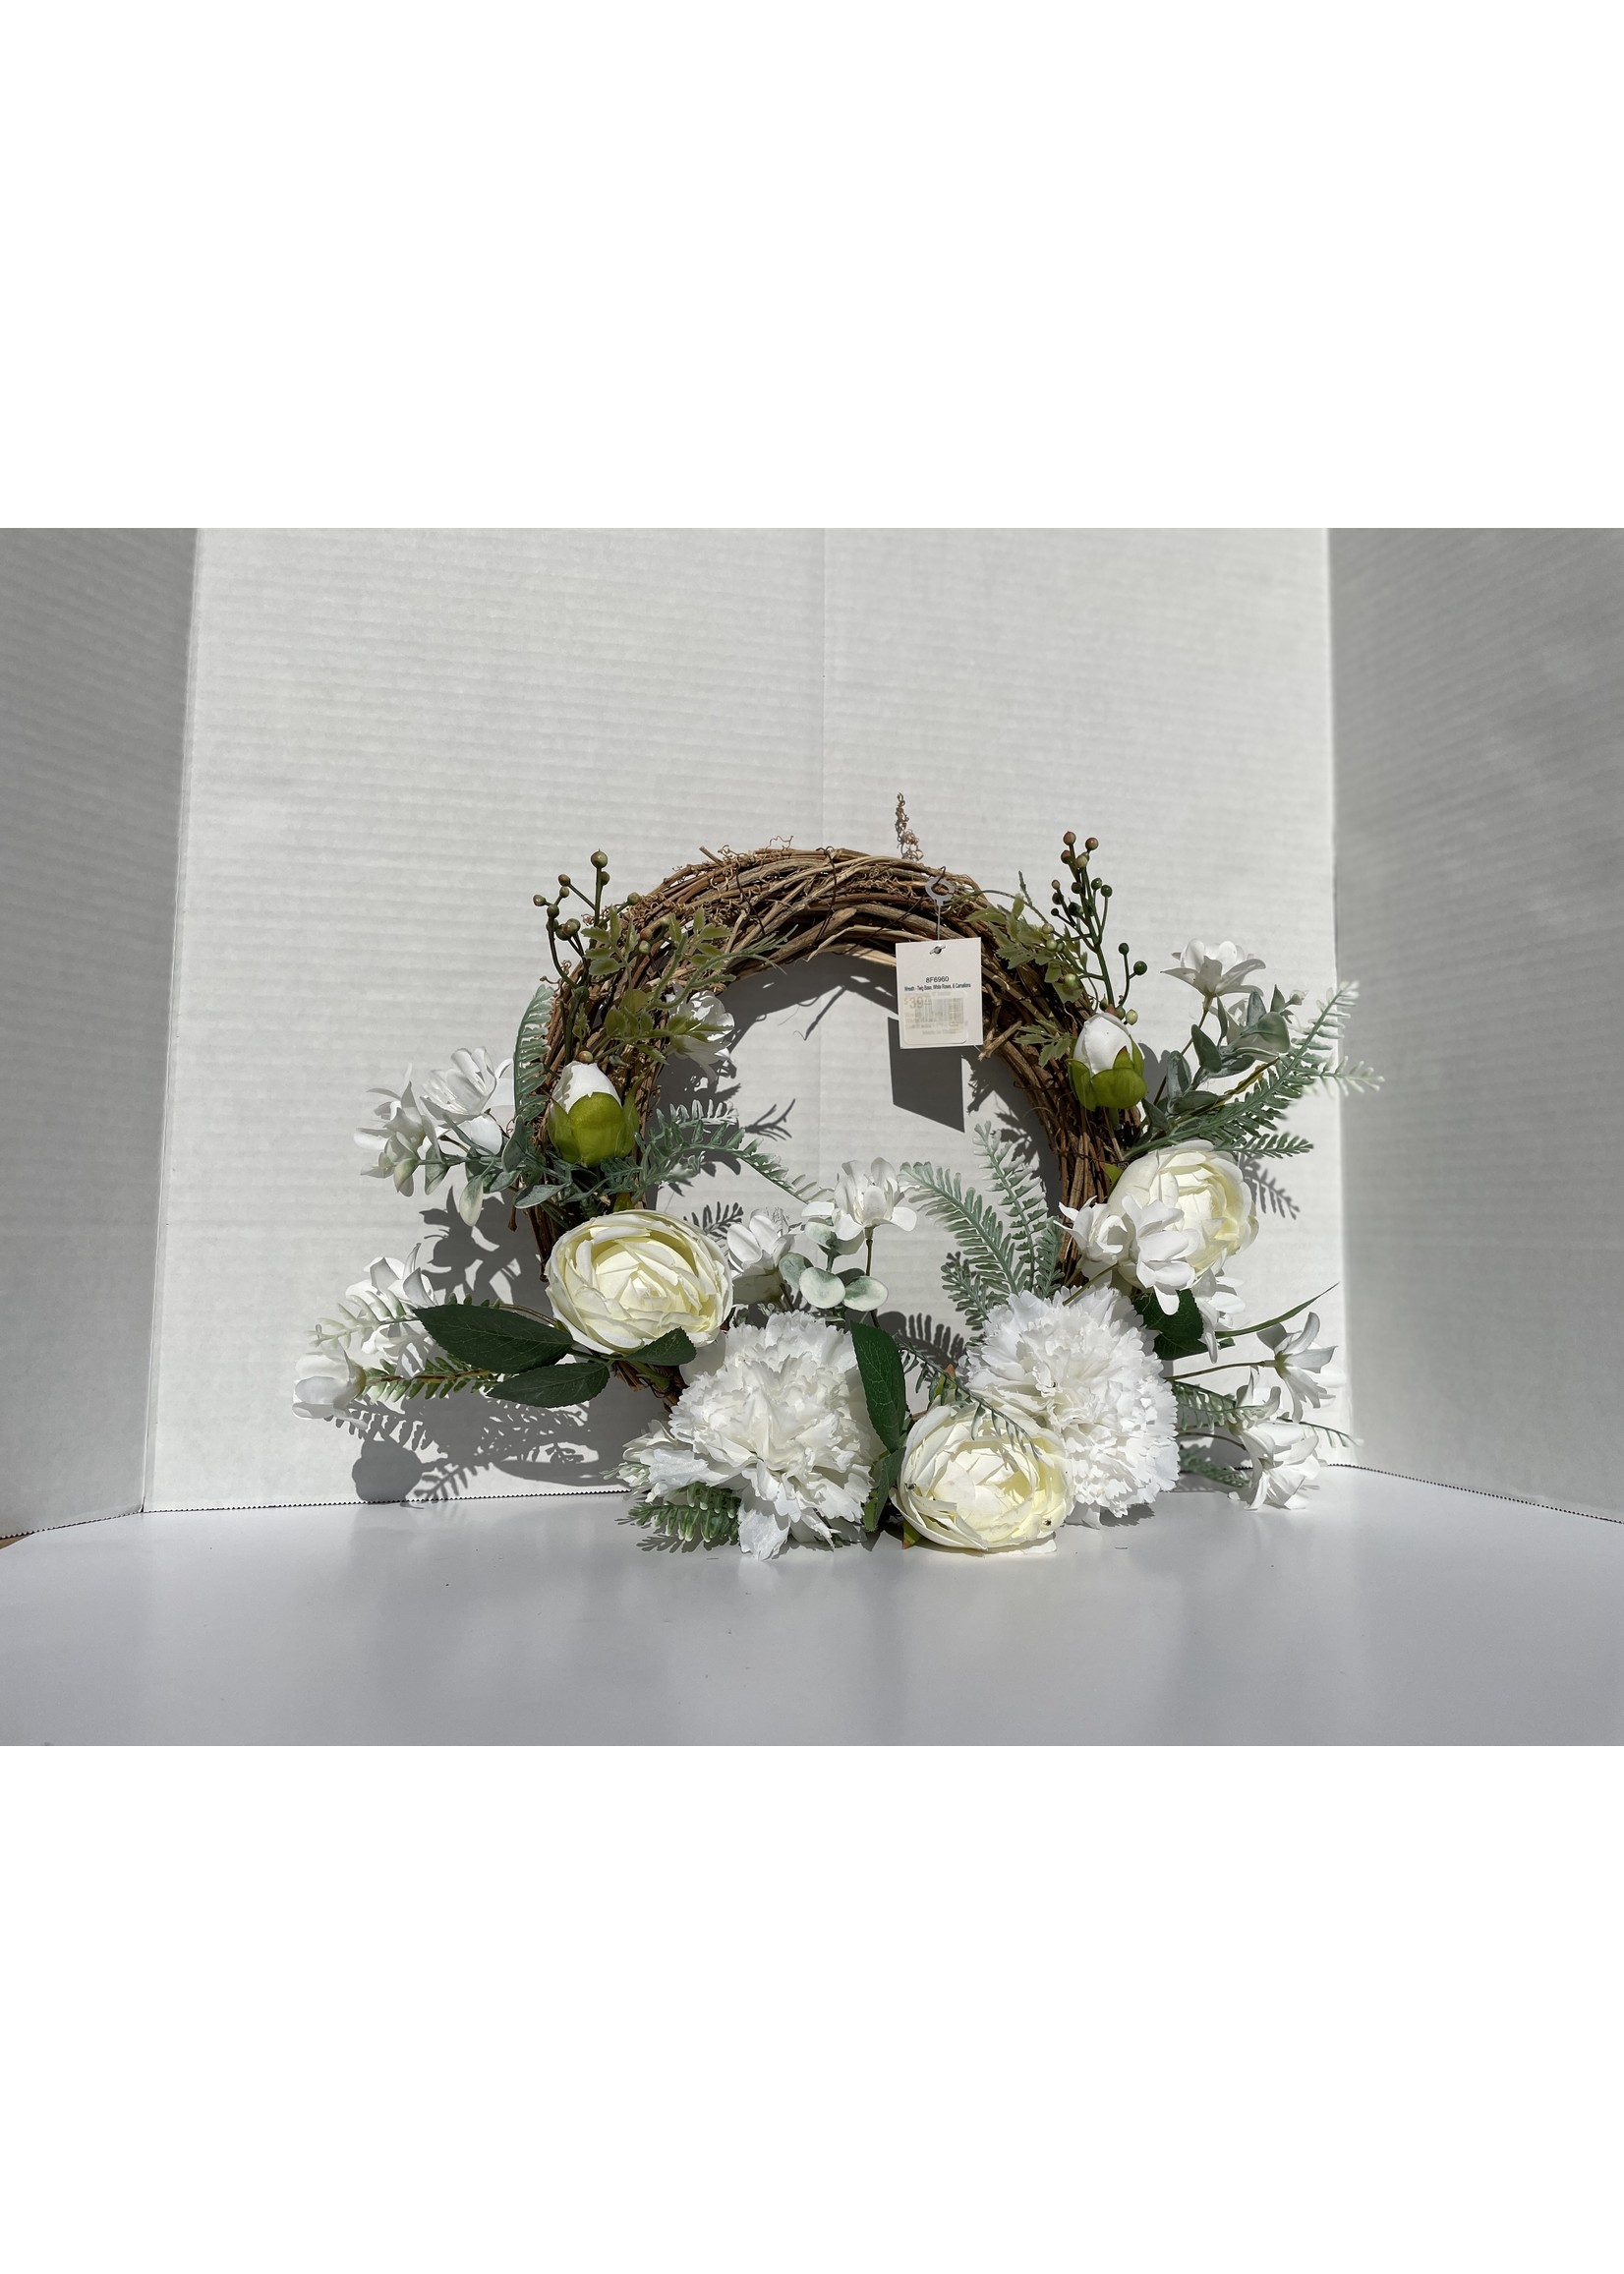 Wreath - Twig, White Roses, Carnations